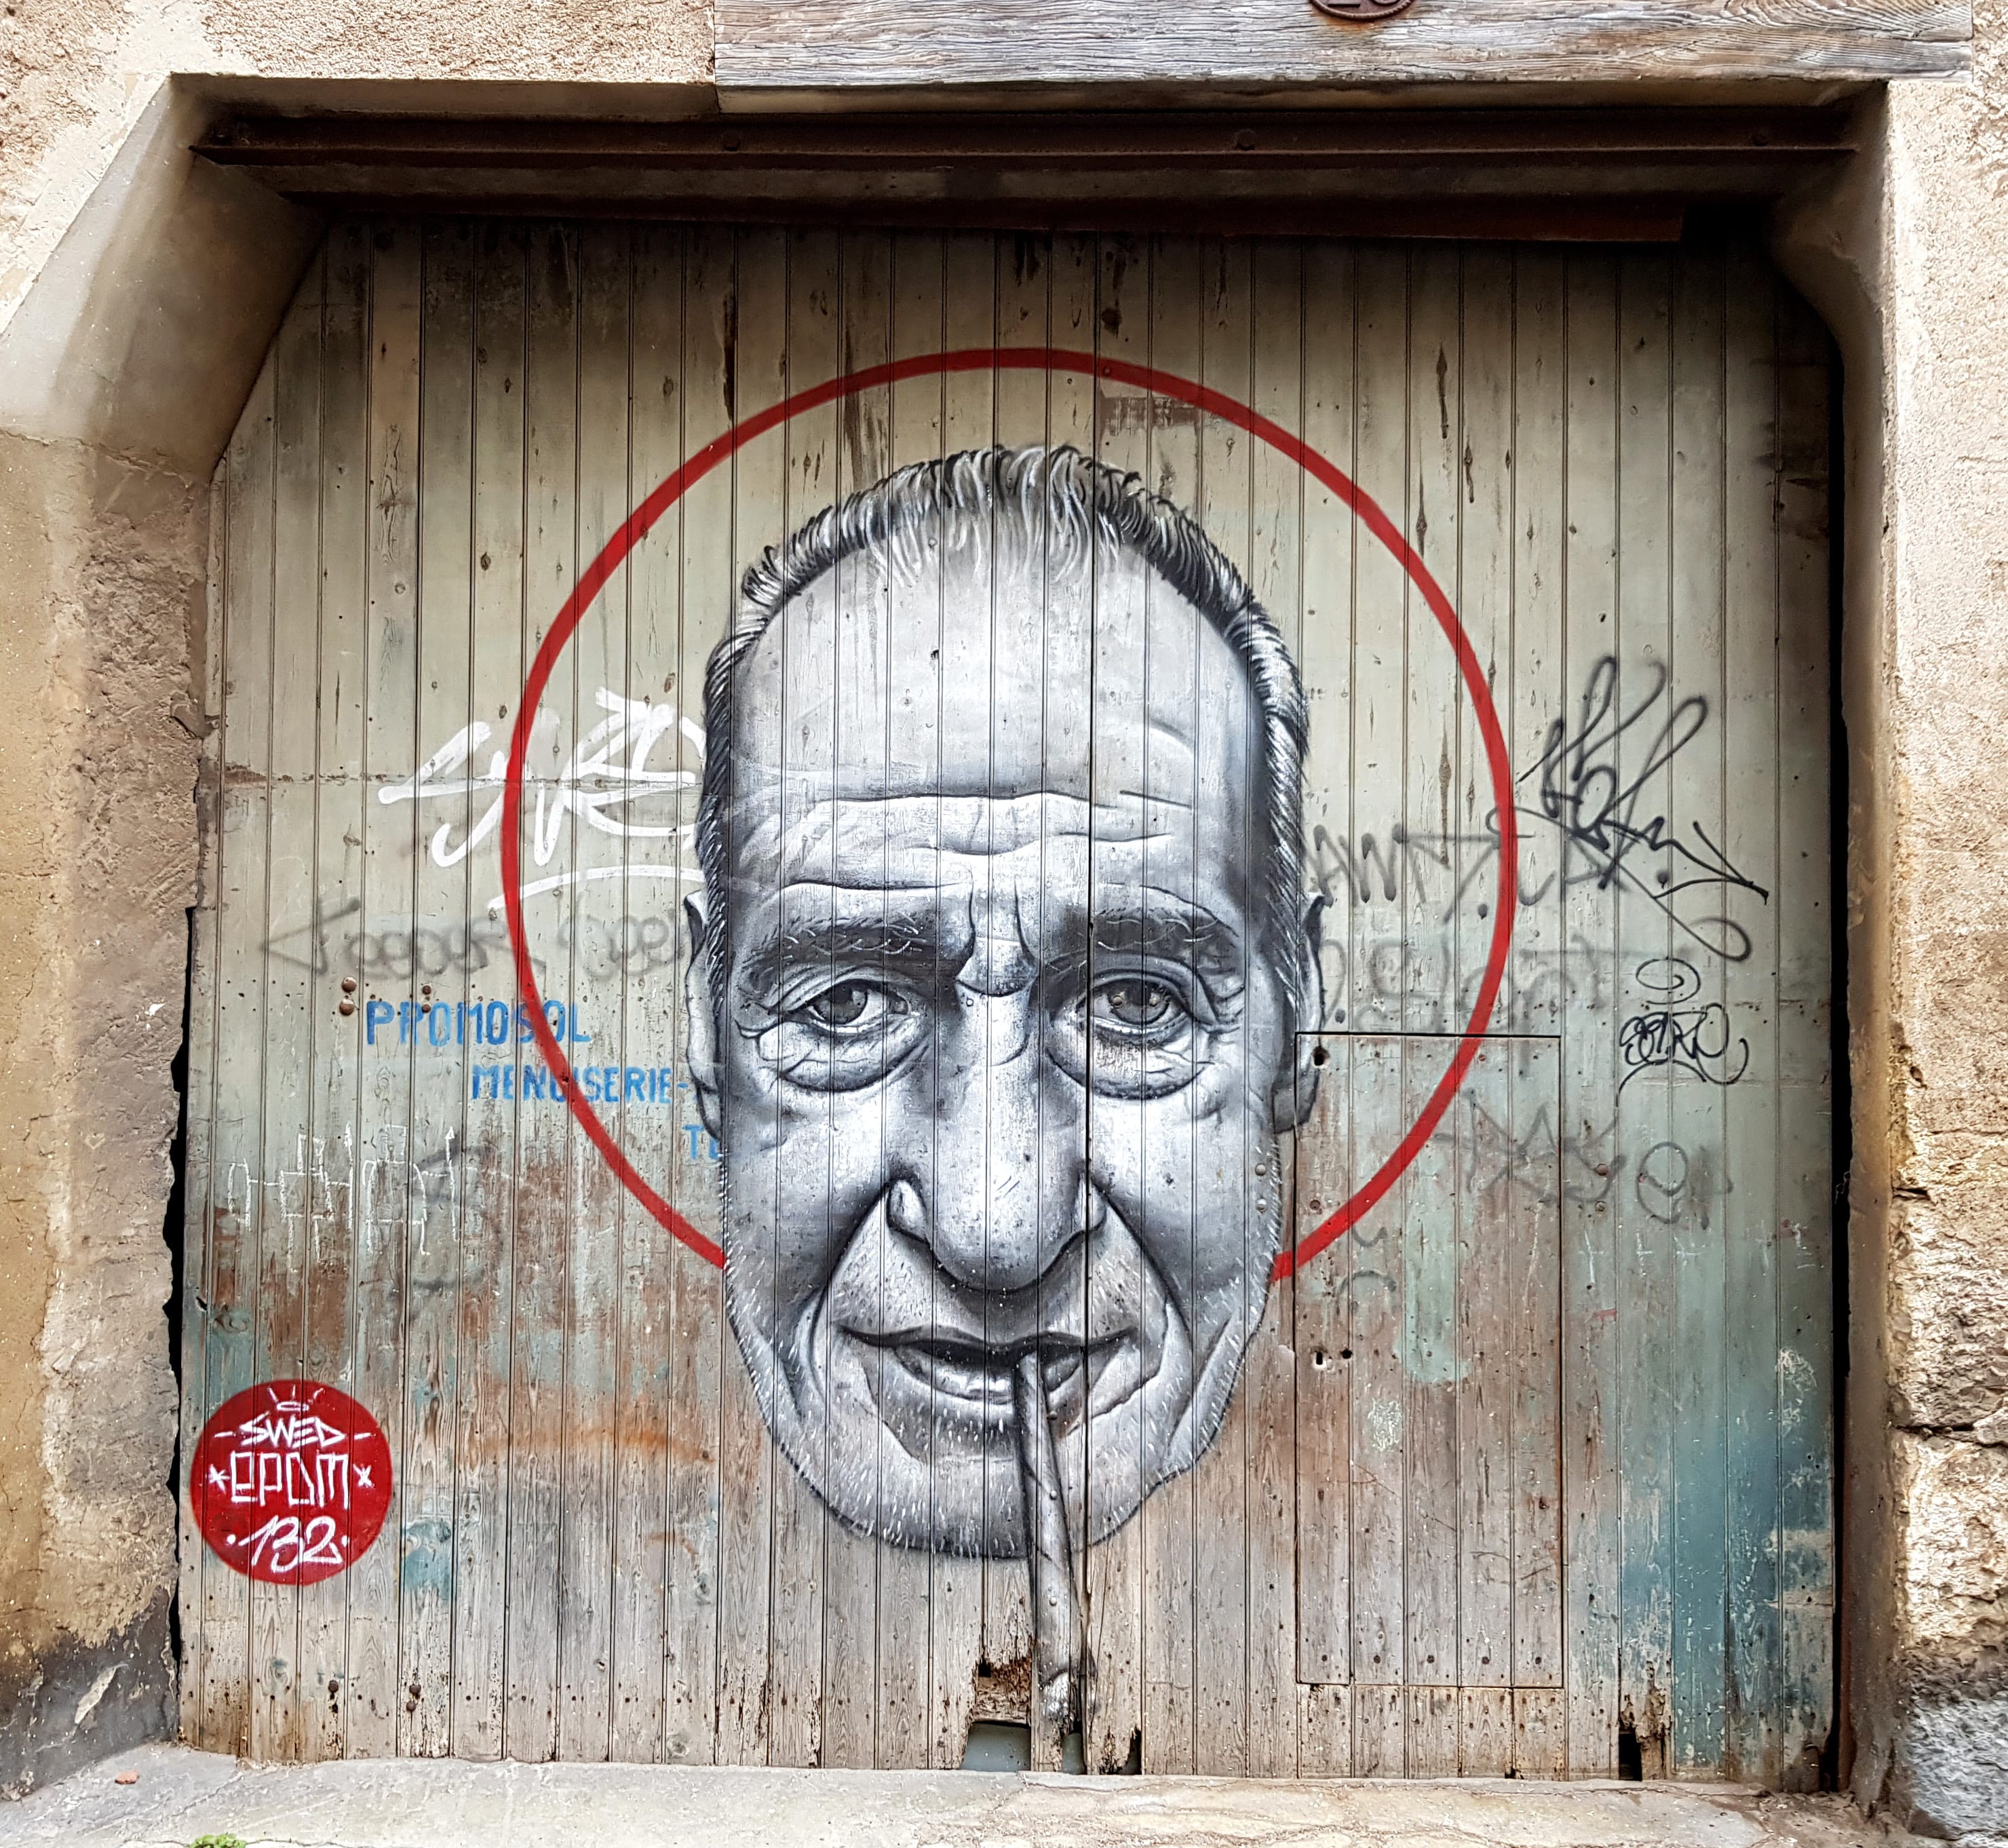 Graffiti 6495  by the artist SWED ONER captured by Mephisroth in Sète France